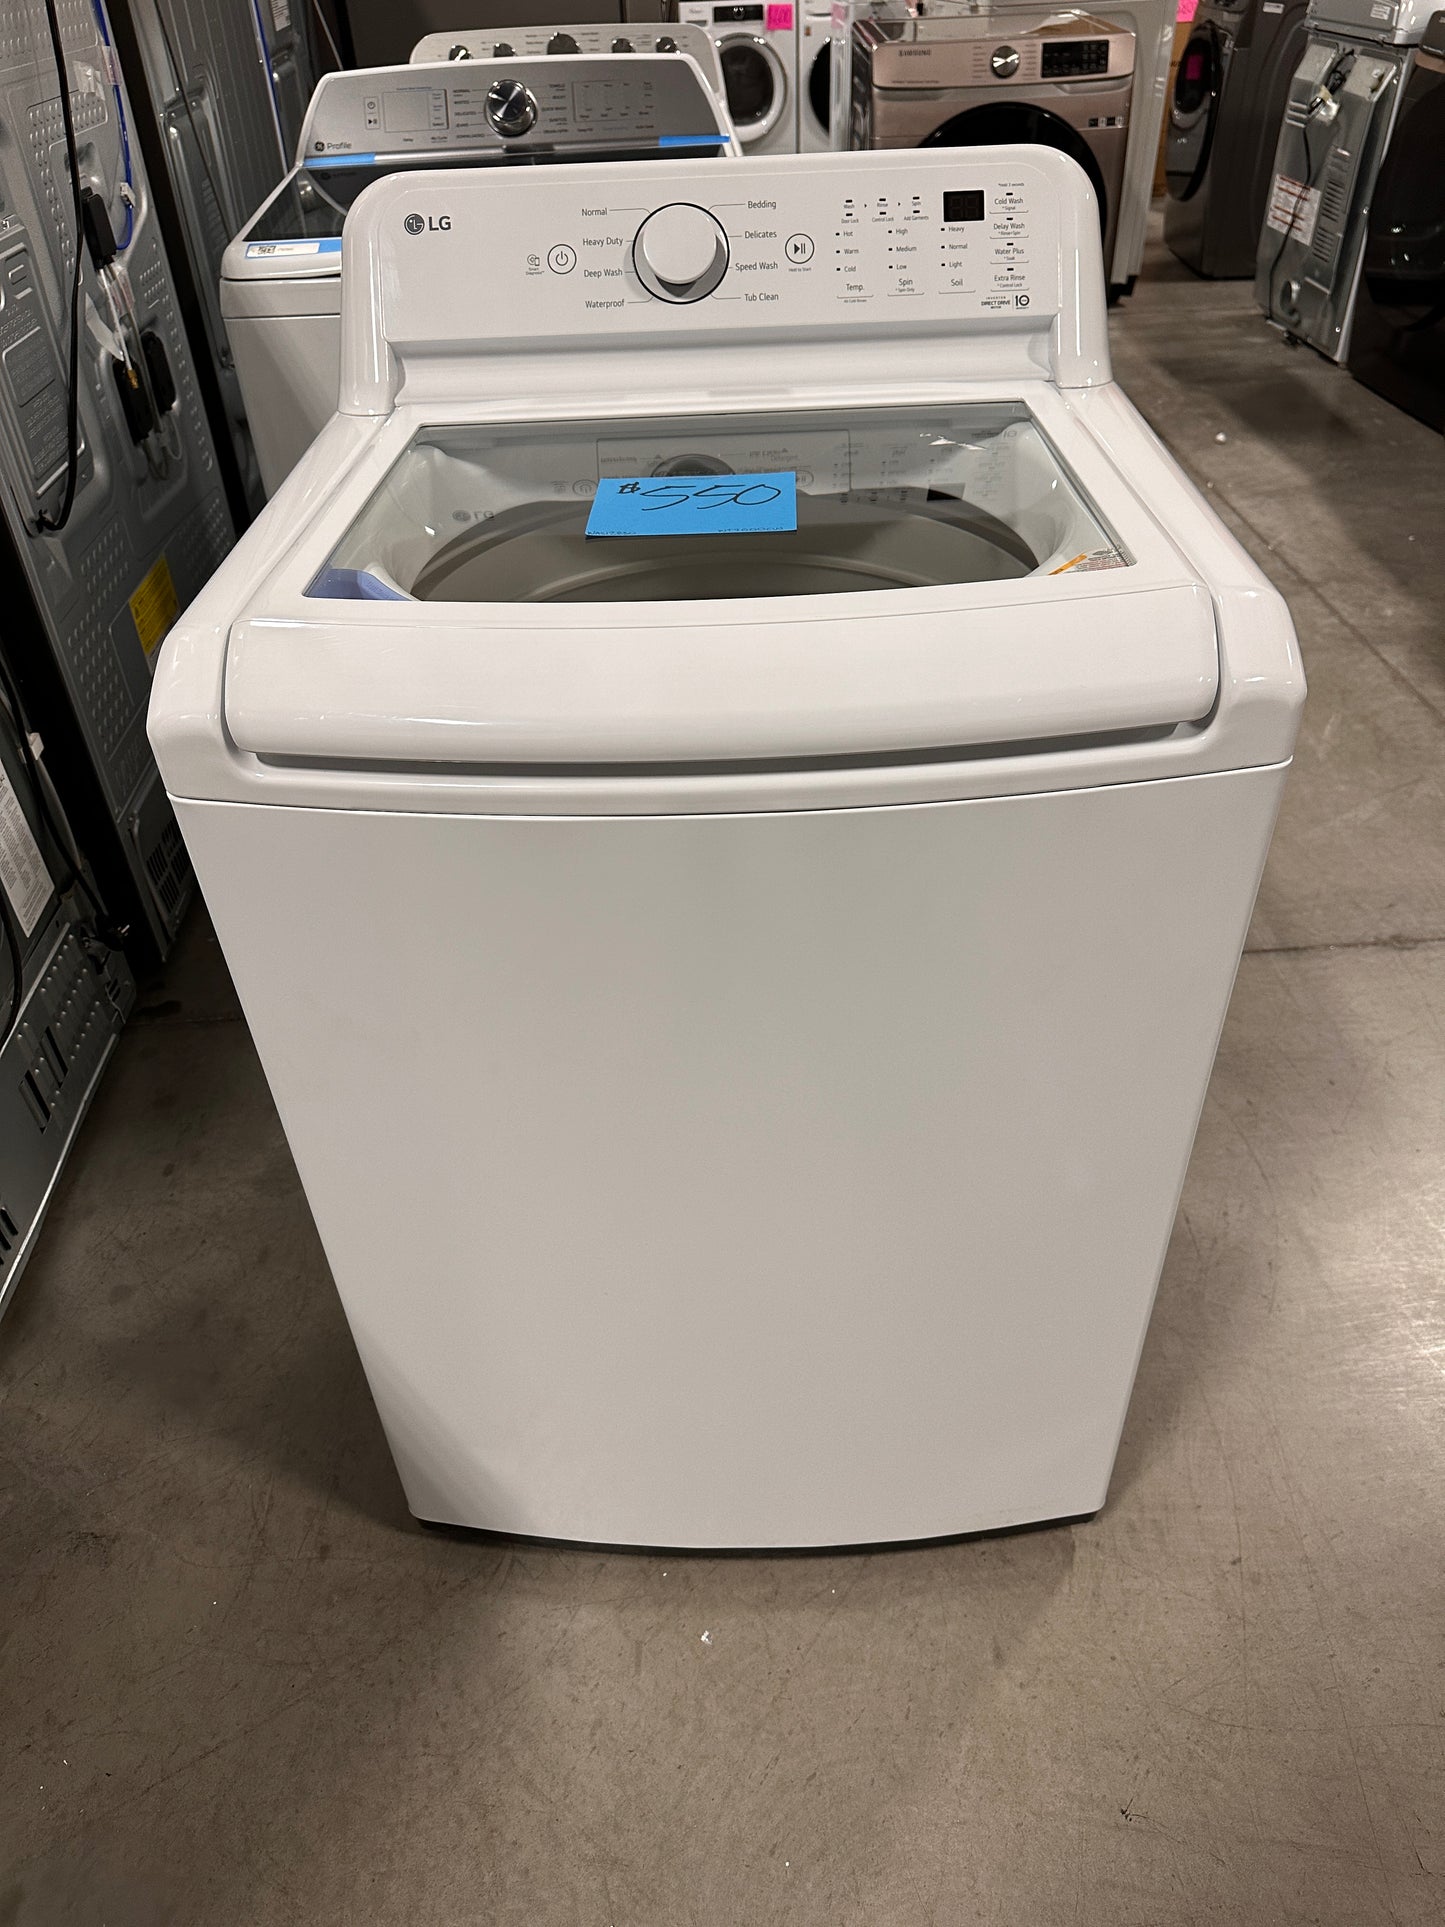 NEW TOP LOAD WASHER WITH VIBRATION REDUCTION - WAS12830